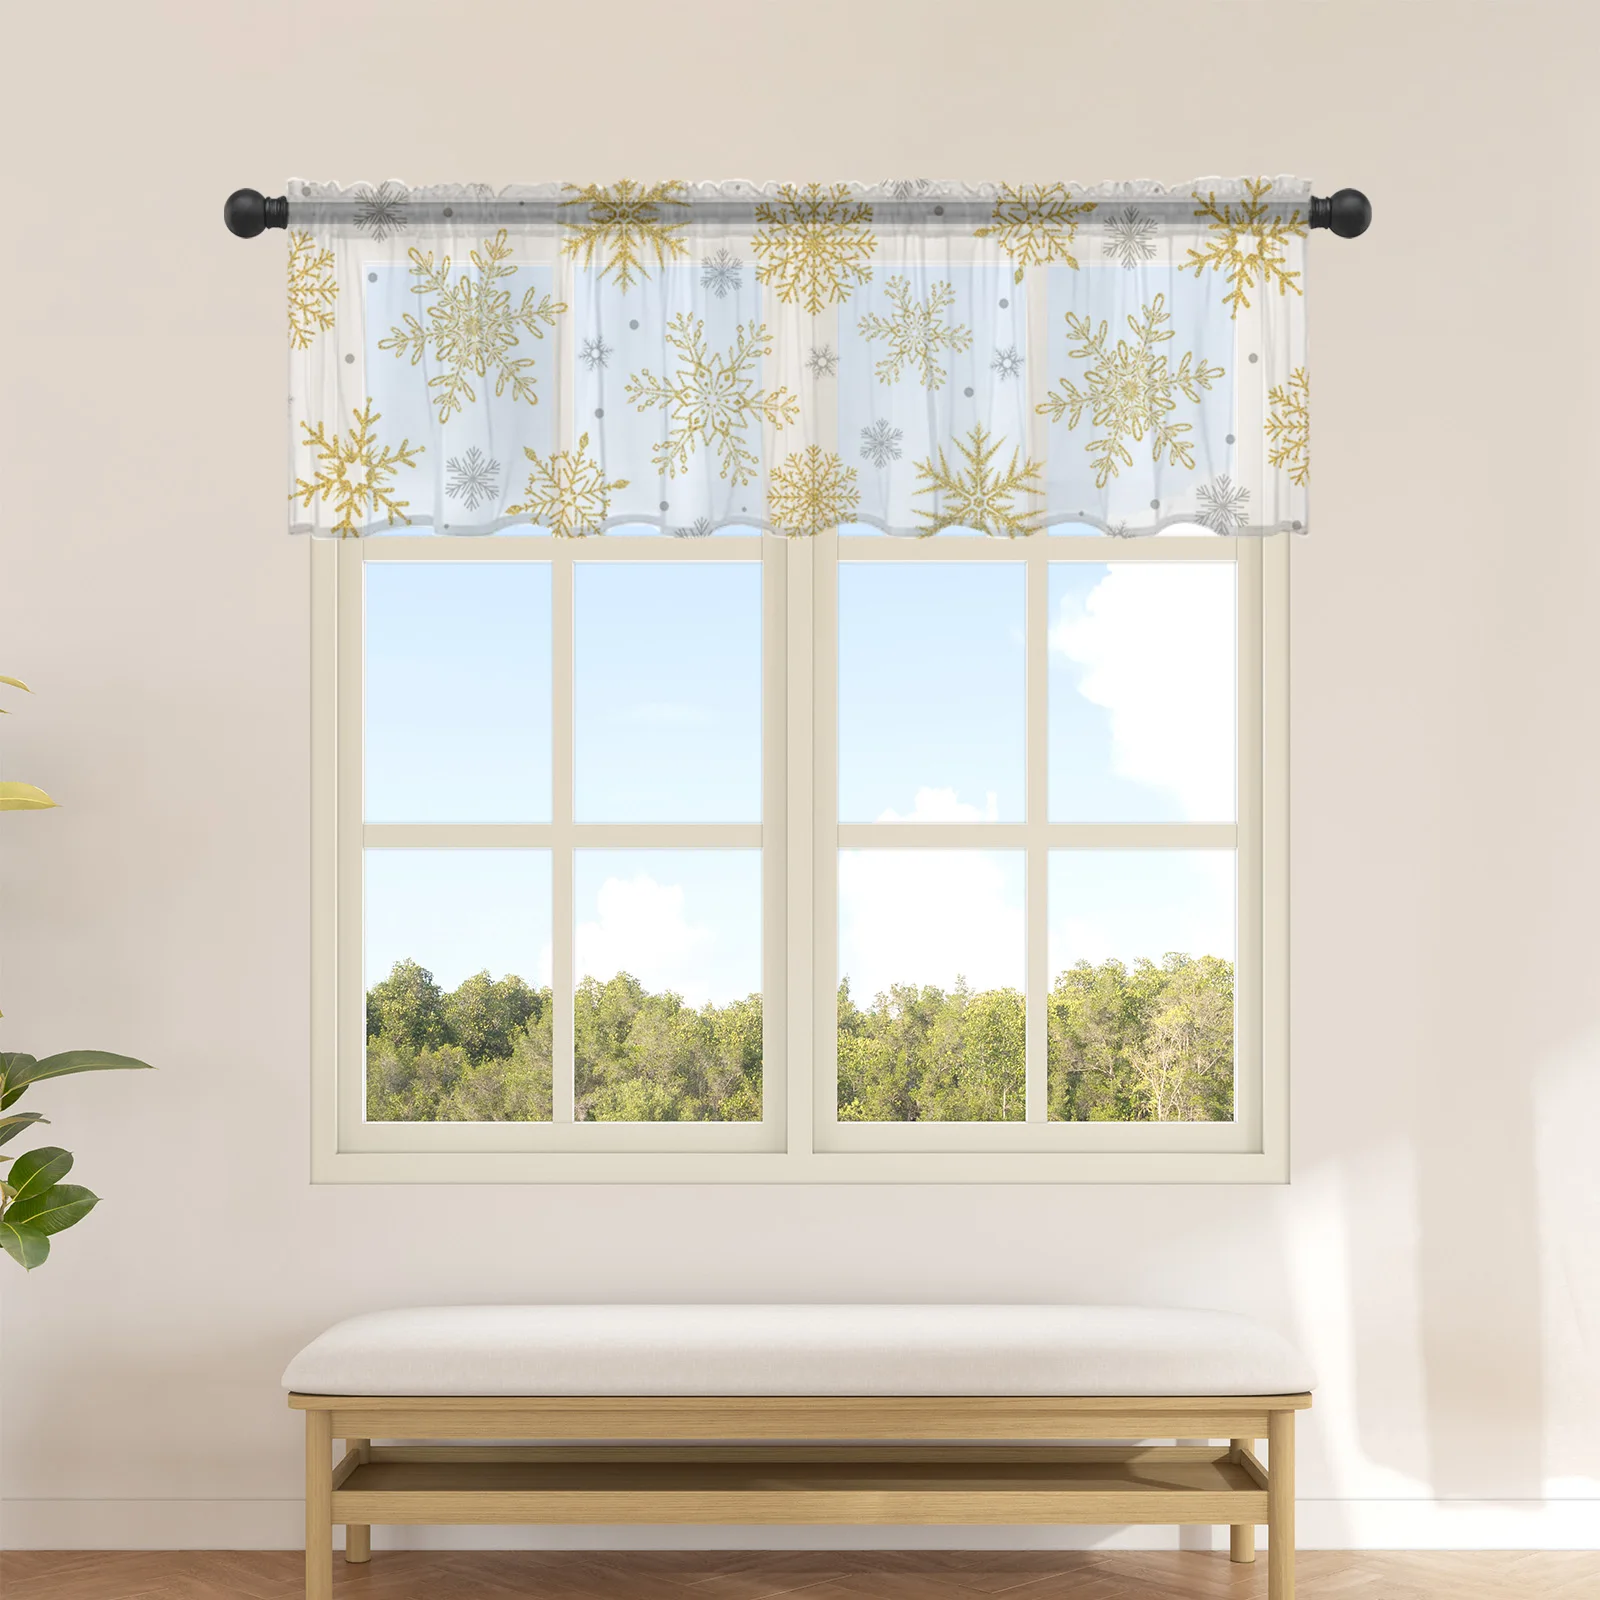 

Christmas Golden Snowflake Texture Short Tulle Curtains for Kitchen Cafe Sheer Voile Half-Curtain for Bedroom Doorway